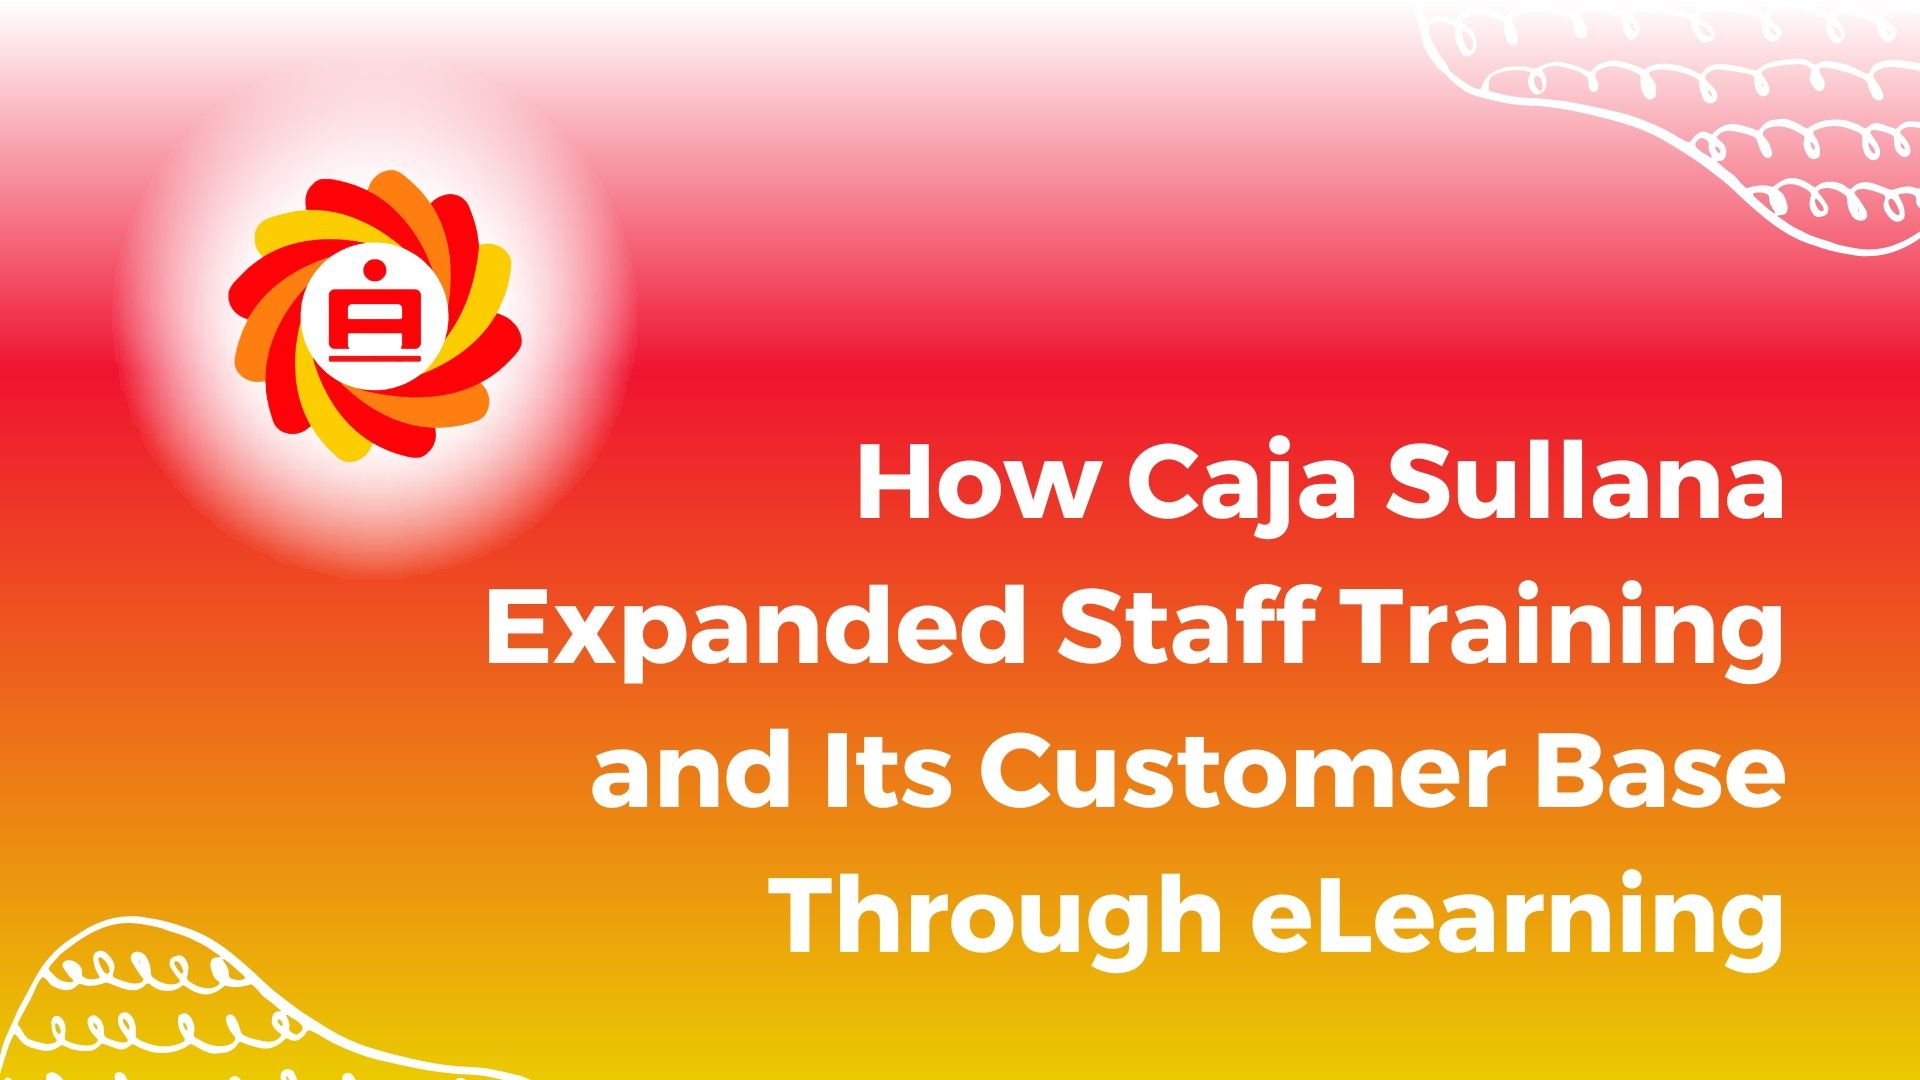 How Caja Sullana Expanded Staff Training and Its Customer Base Through eLearning